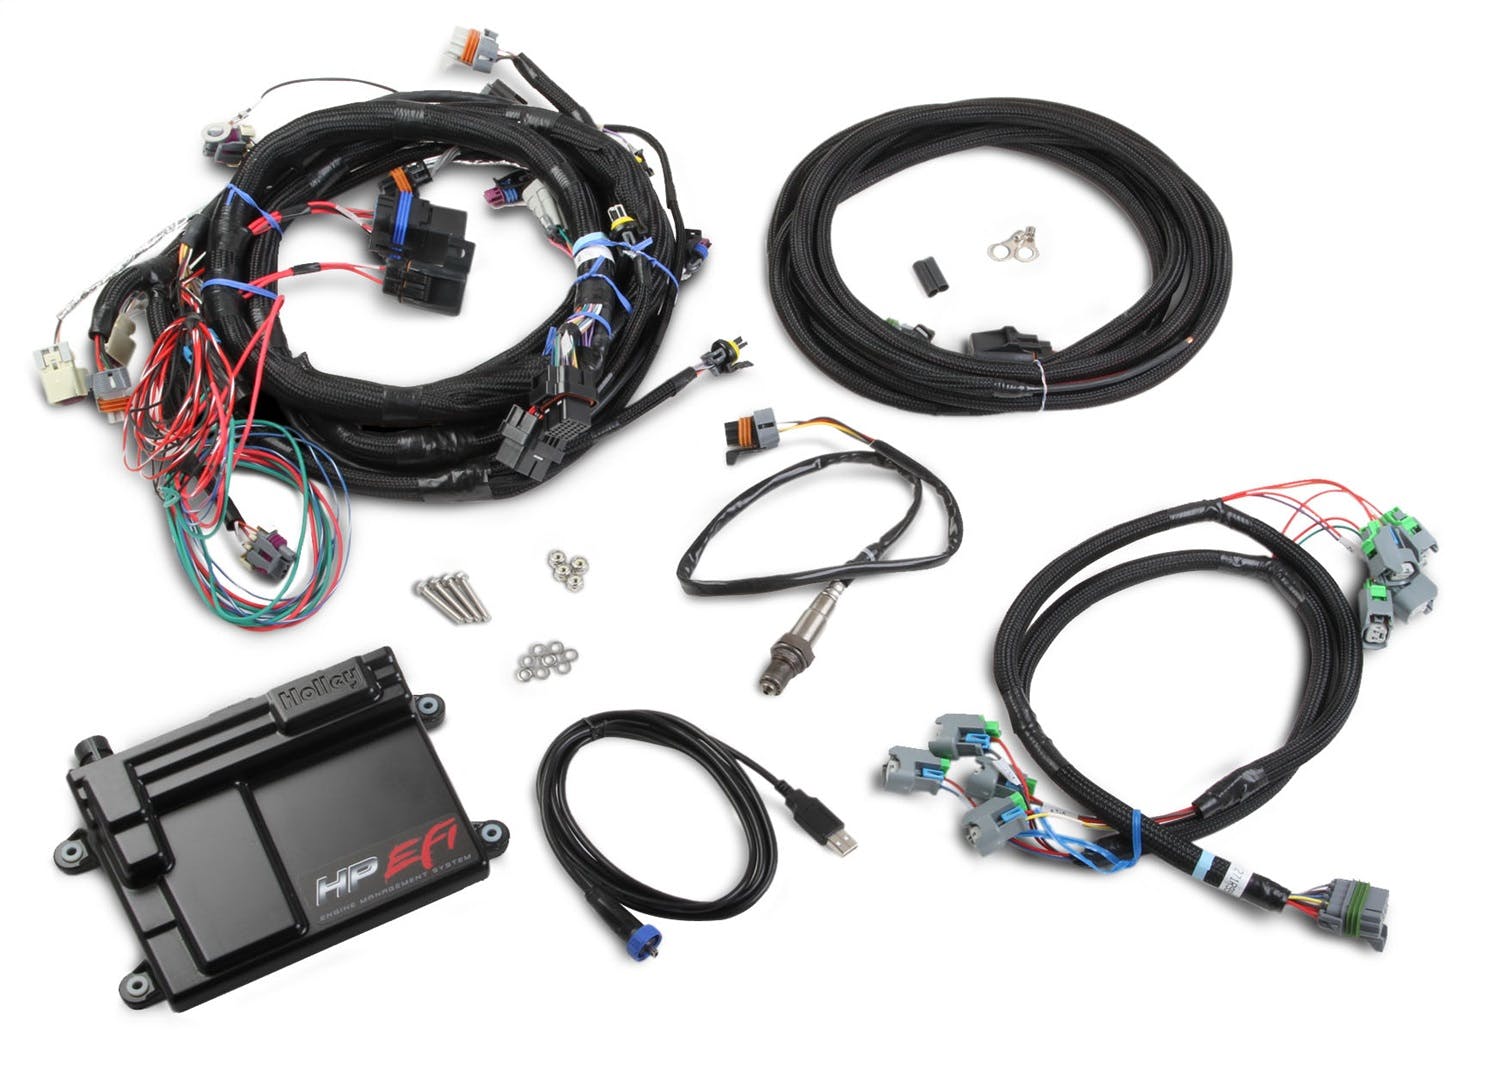 Holley EFI 550-603 HP ECU AND HARNESS LS2 and LS7